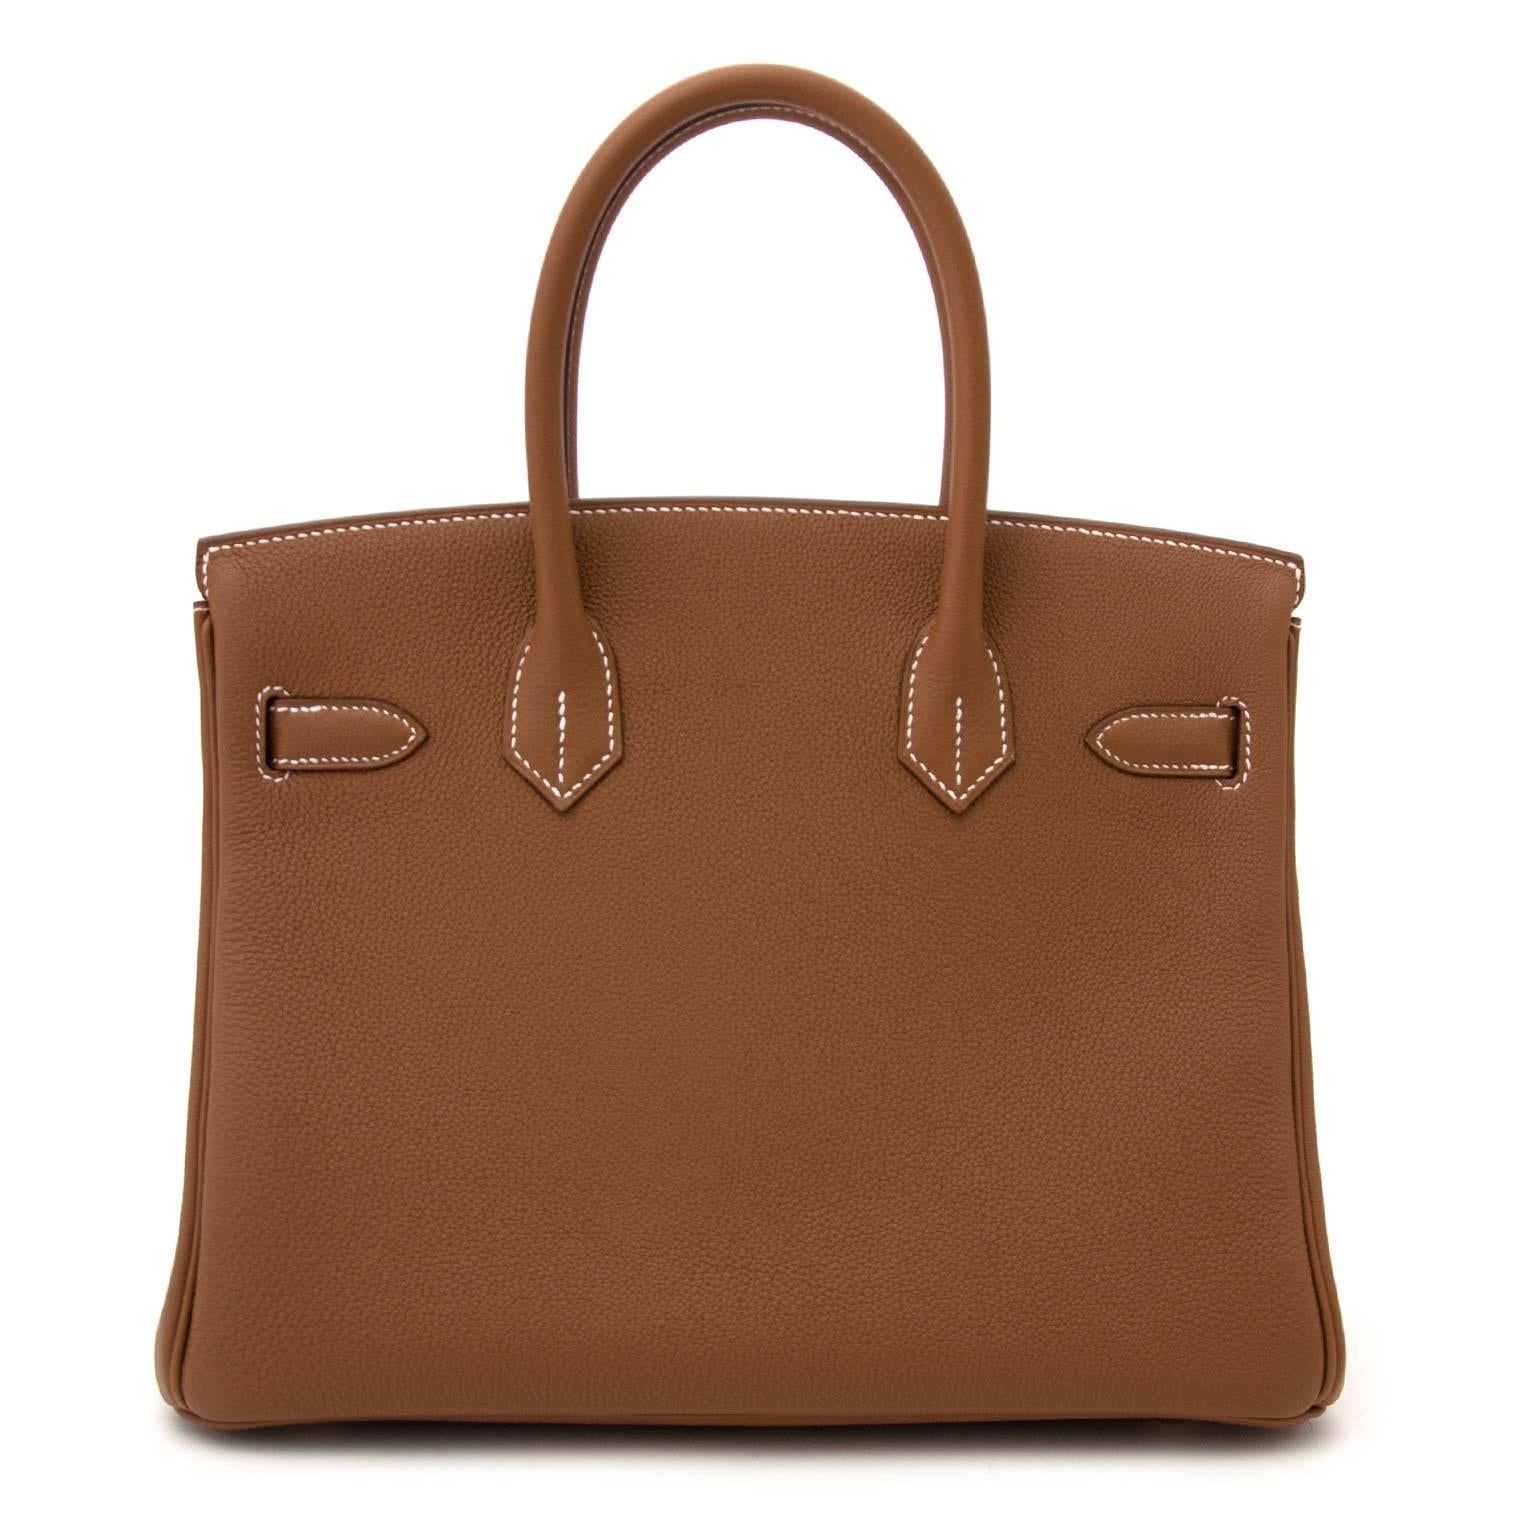 Never used

Hermès Birkin 30 Togo Gold GHW

Skip the waitinglist and get this beauty right now! This iconic Hermès Birkin bag comes in the color 'Gold' which is a vibrant warm brown color. The gold toned hardware finishes of the entire look. Togo